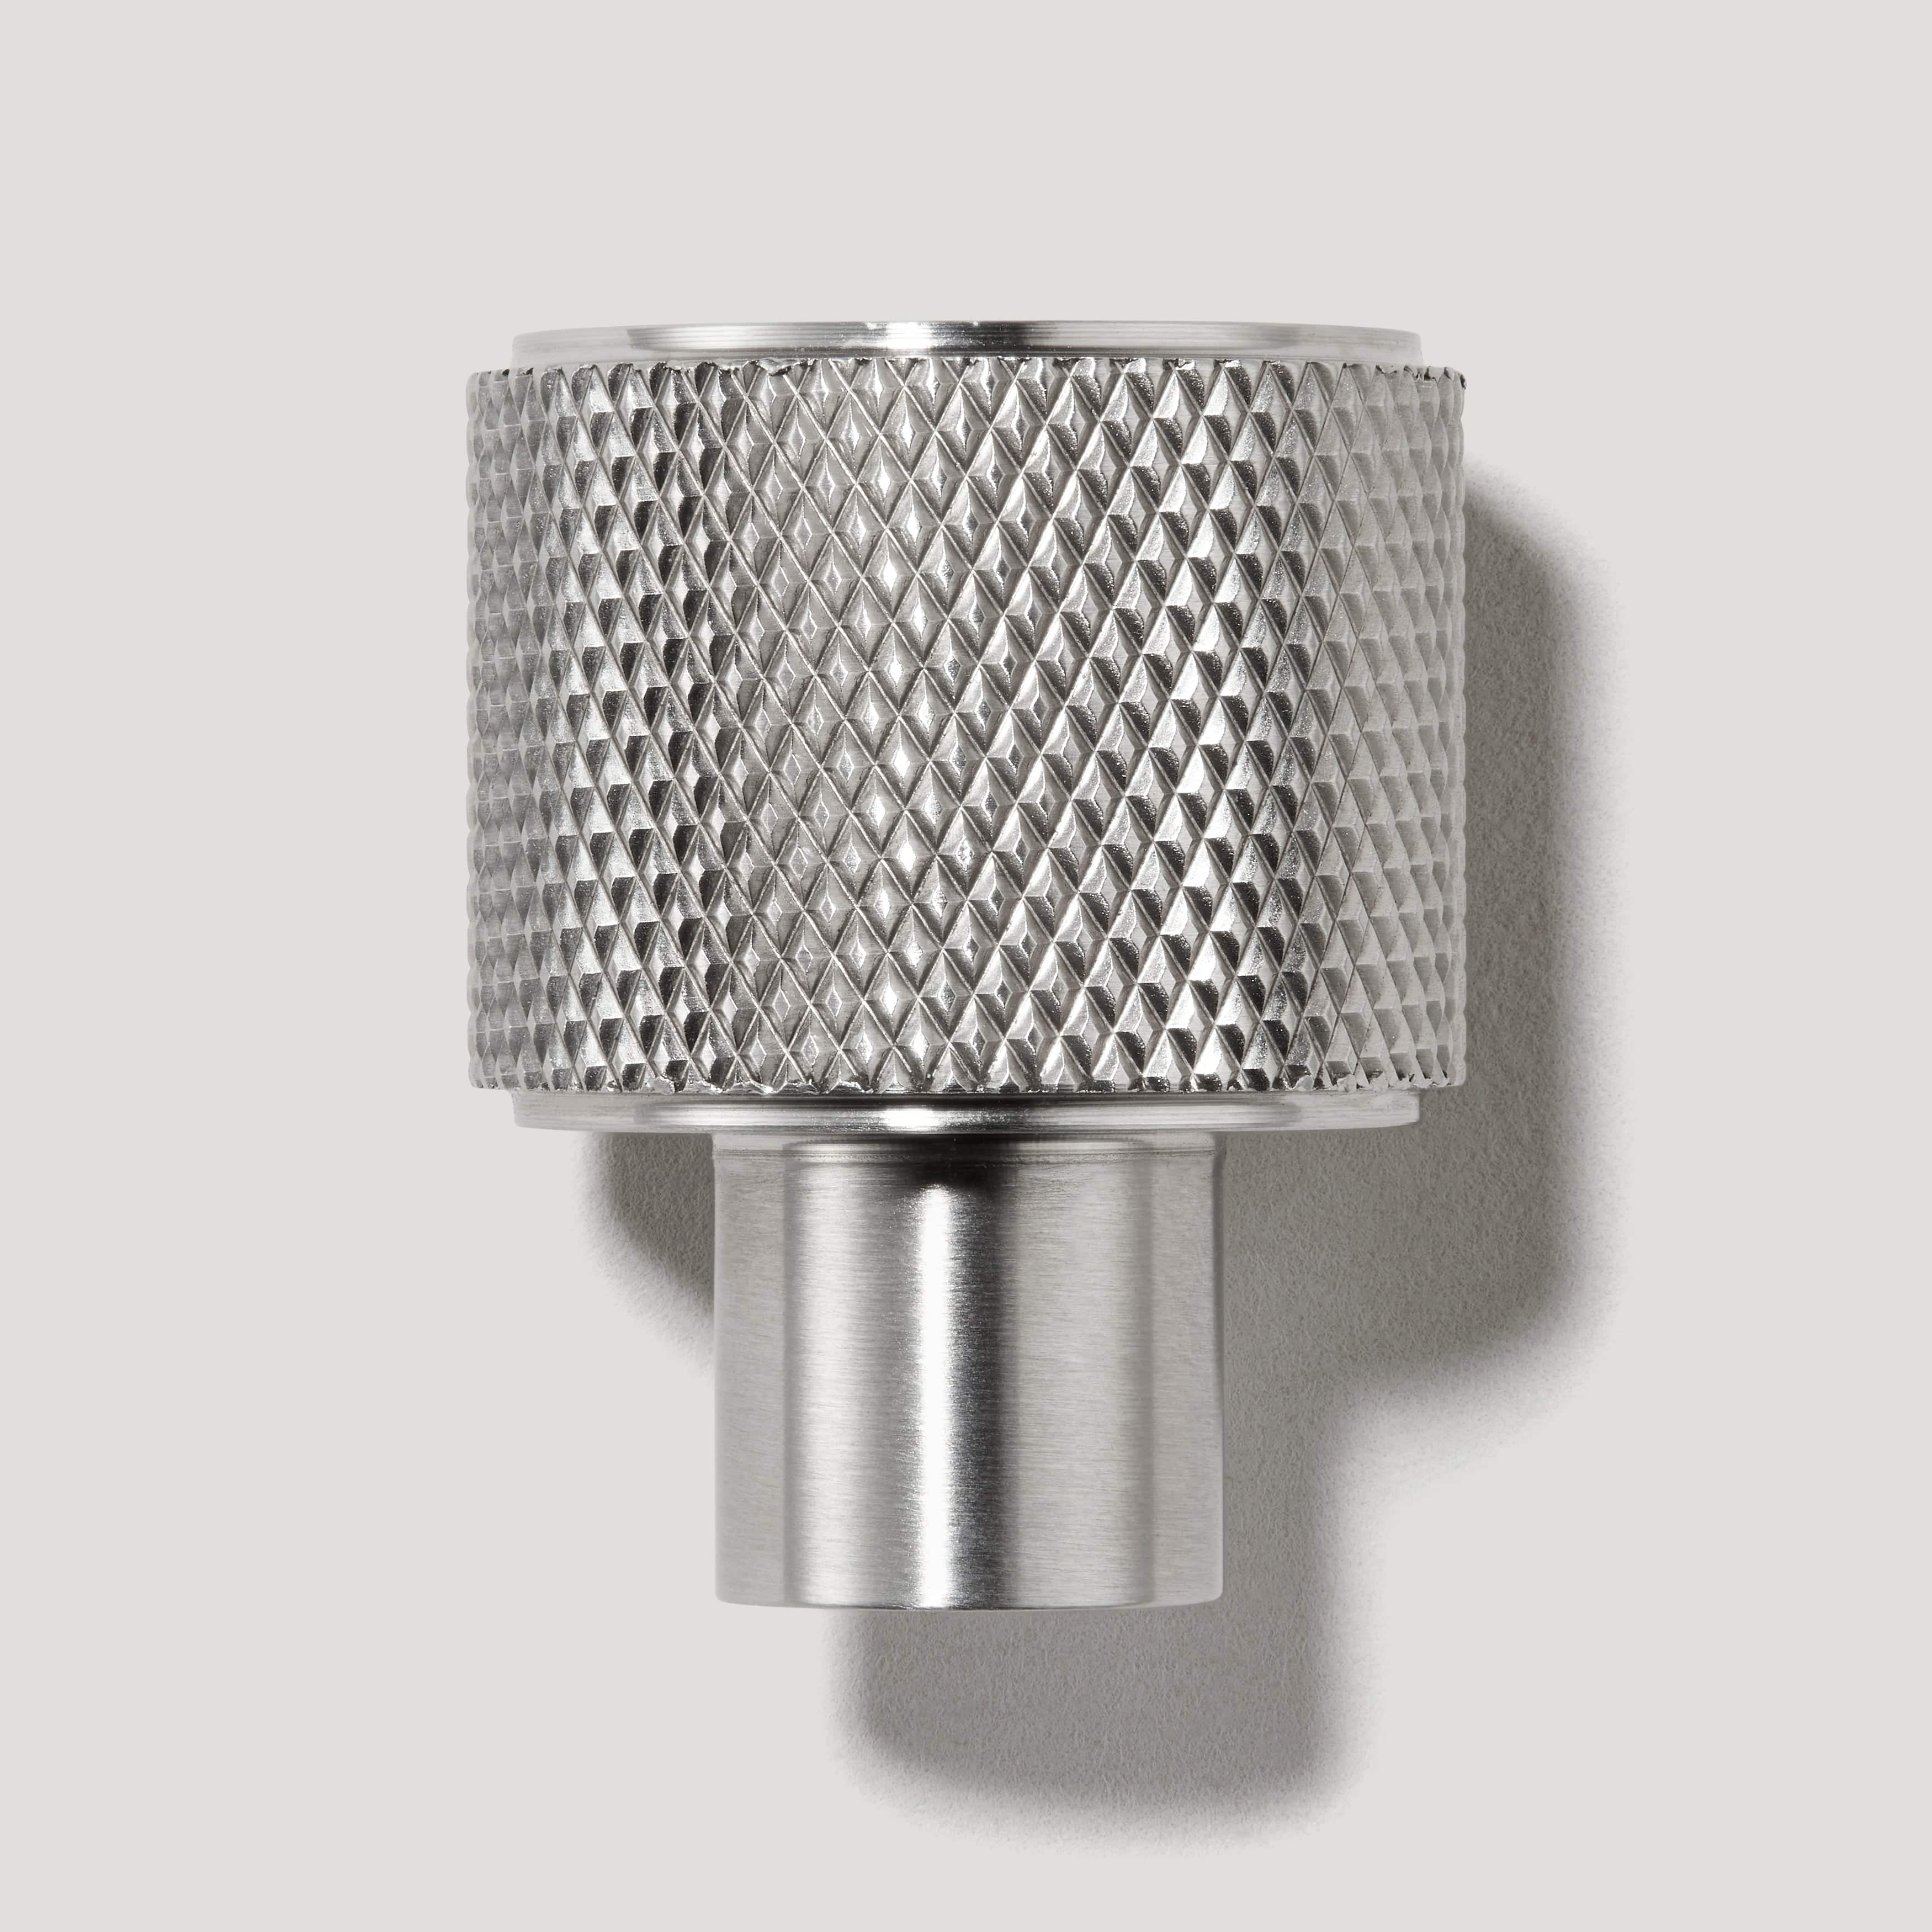 Plank Hardware REVILL Knurled Button Cabinet Knob - Stainless Steel